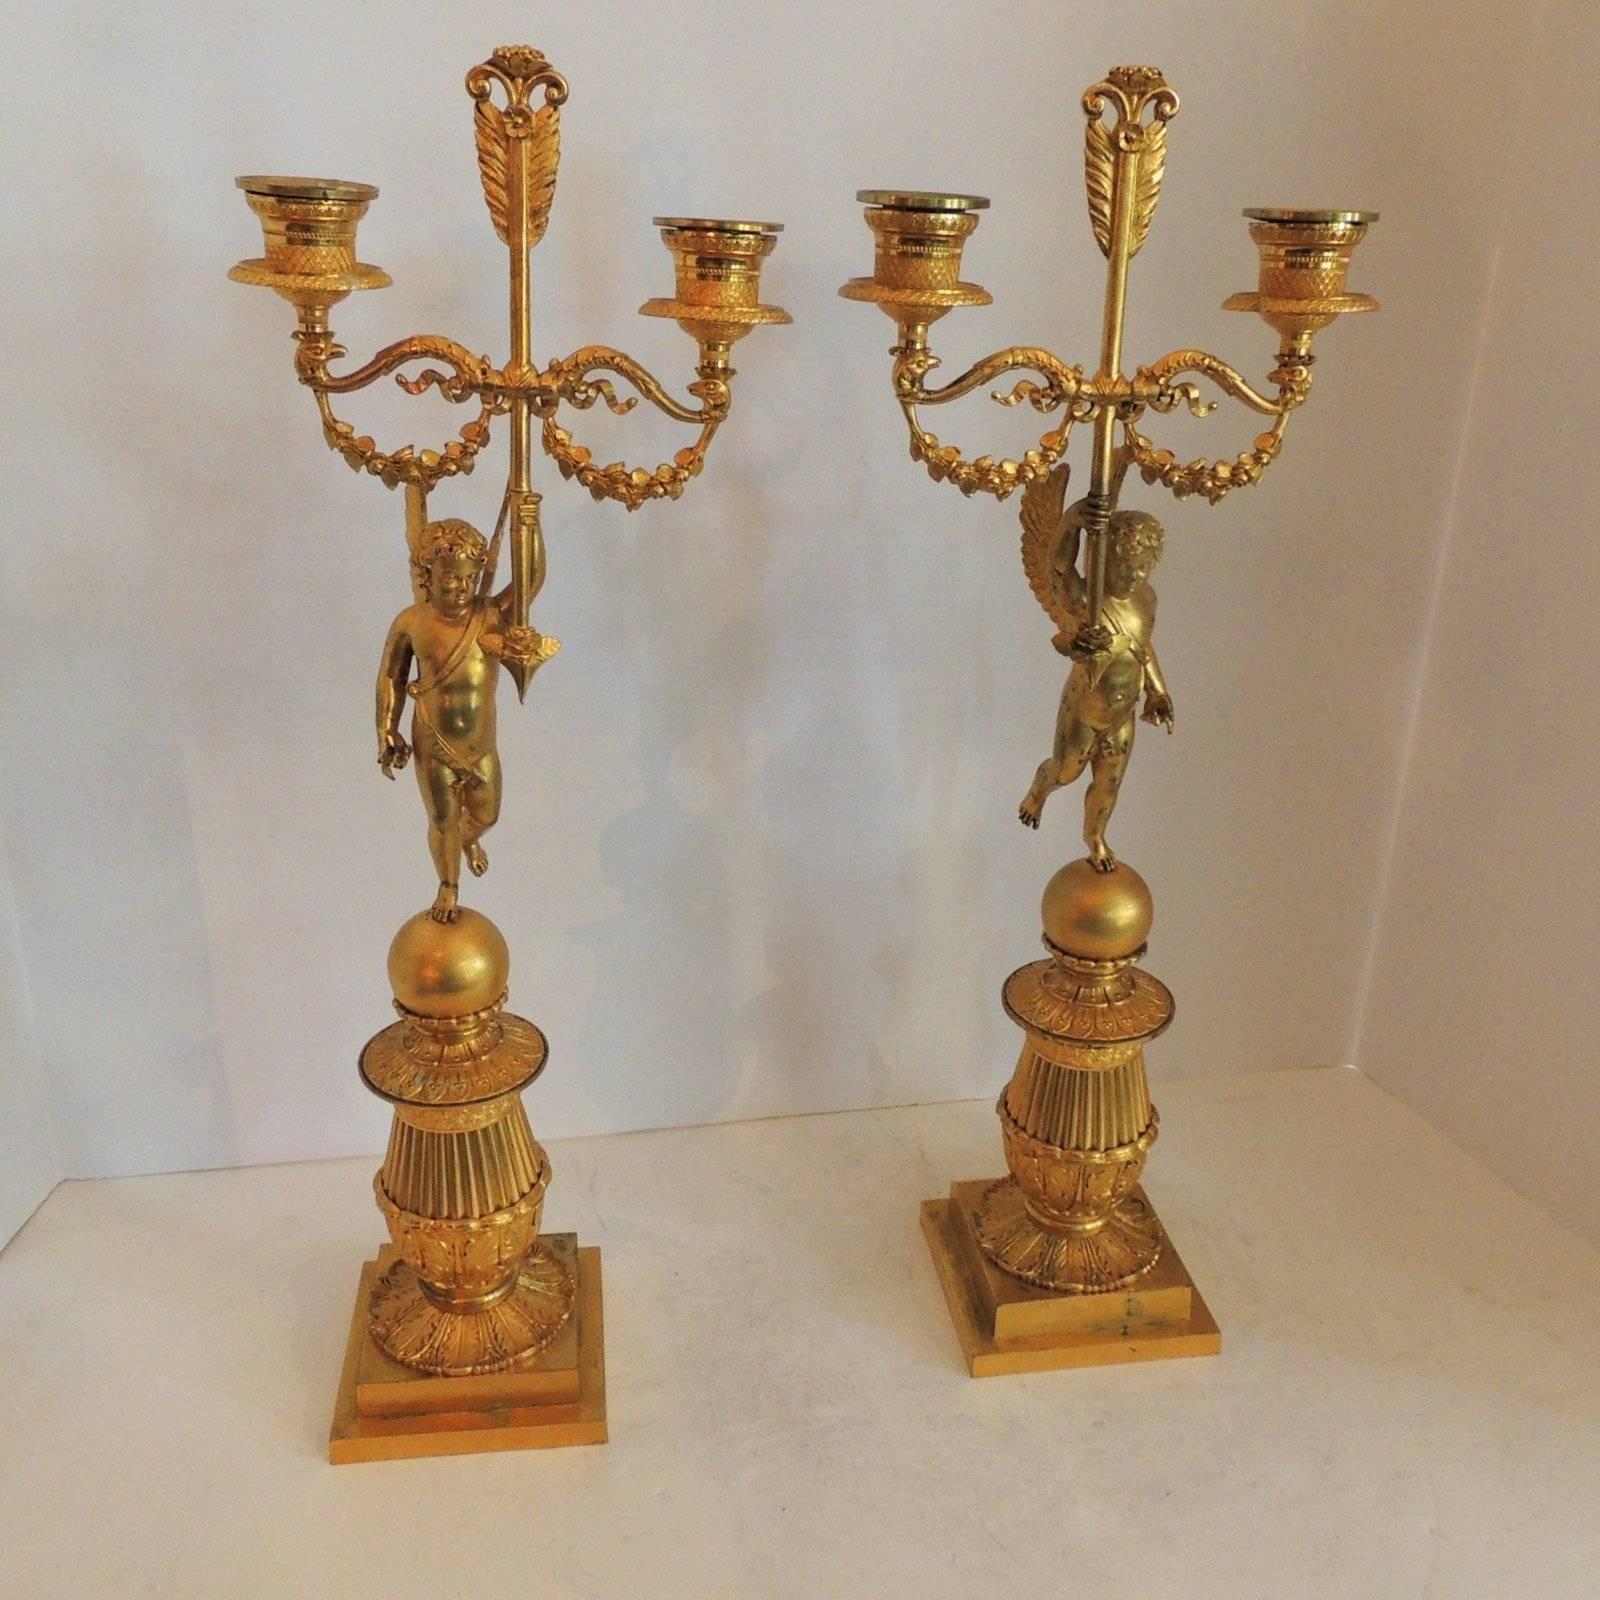 A wonderful pair of doré bronze two-arm winged putti cherub neoclassical candelabras
Measures: 18" H x 6.5" W x 4" D.